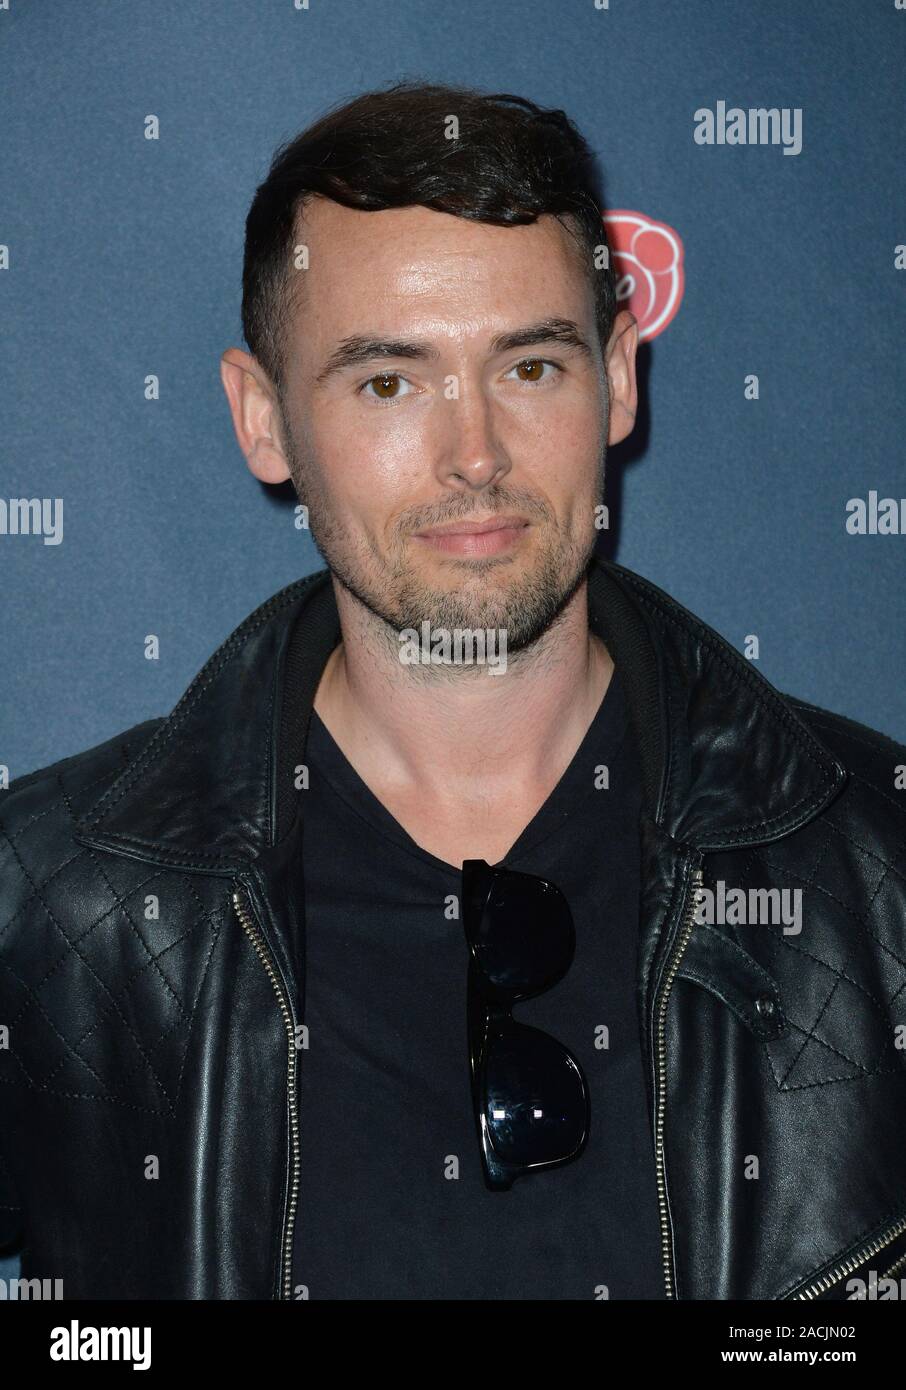 LOS ANGELES, CA - MARCH 29, 2016: Singer Keith Cullen at the premiere for 'High Strung' at the TCL Chinese 6 Theatres, Hollywood.  © 2016 Paul Smith / Featureflash Stock Photo